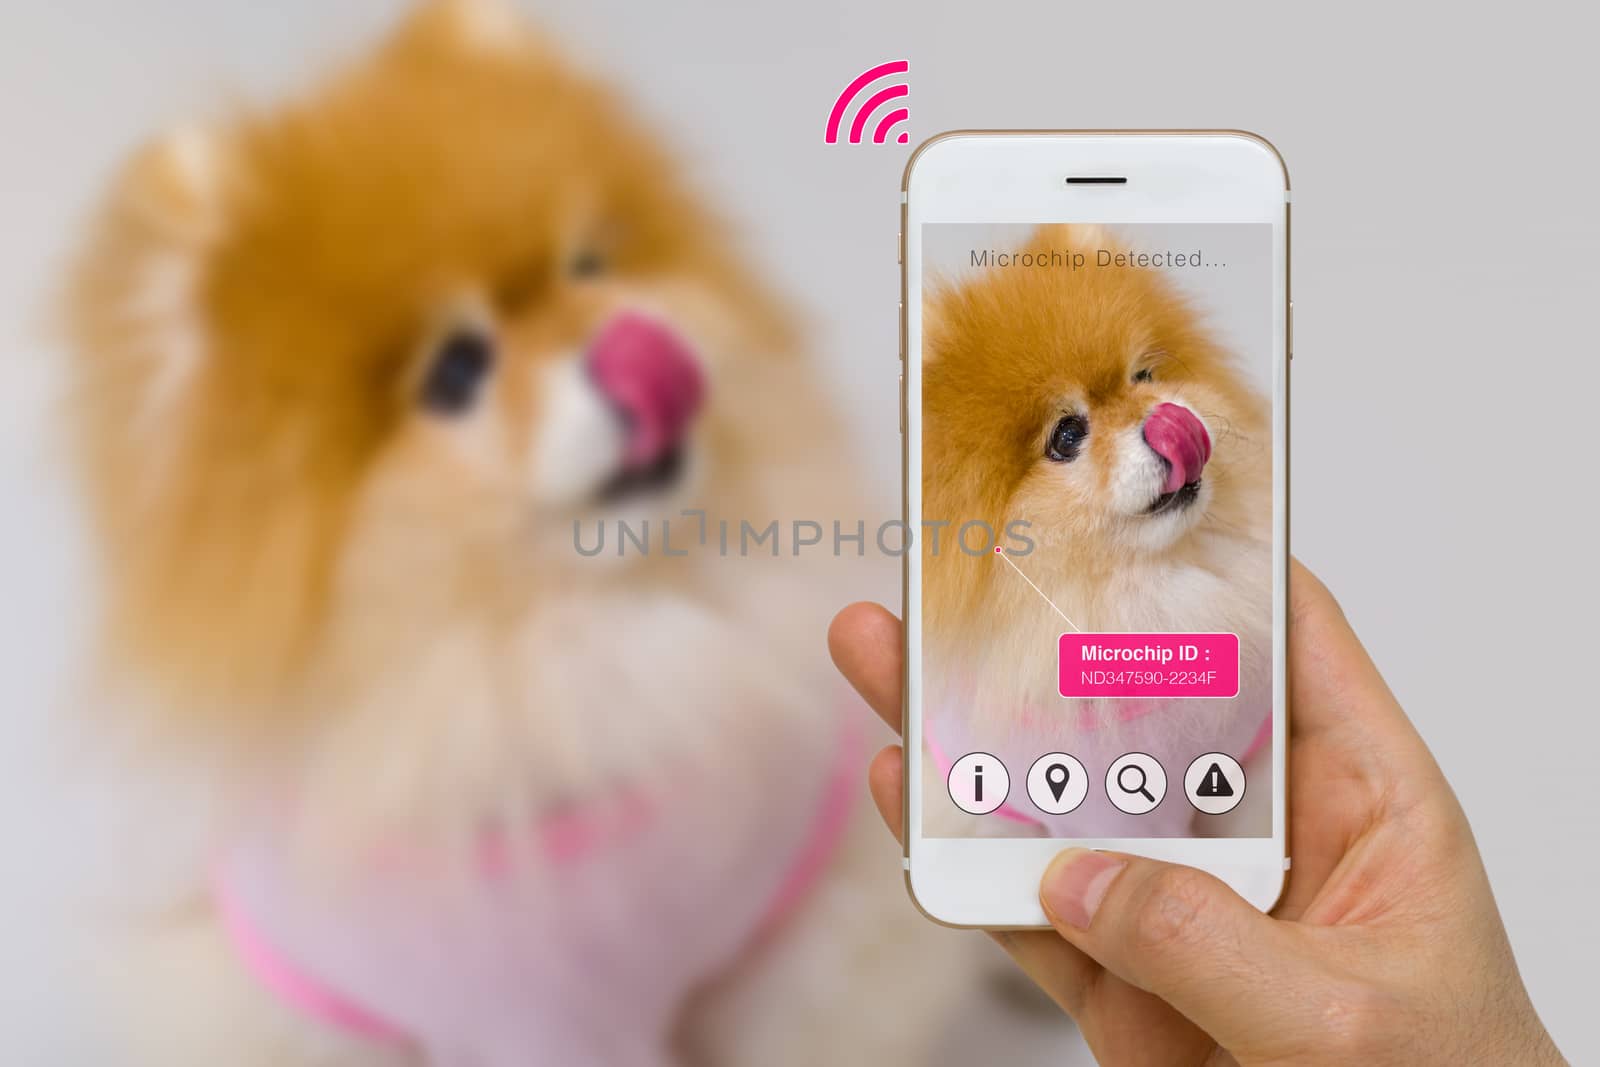 Concept of augmented reality of pet microchip app on smartphone.